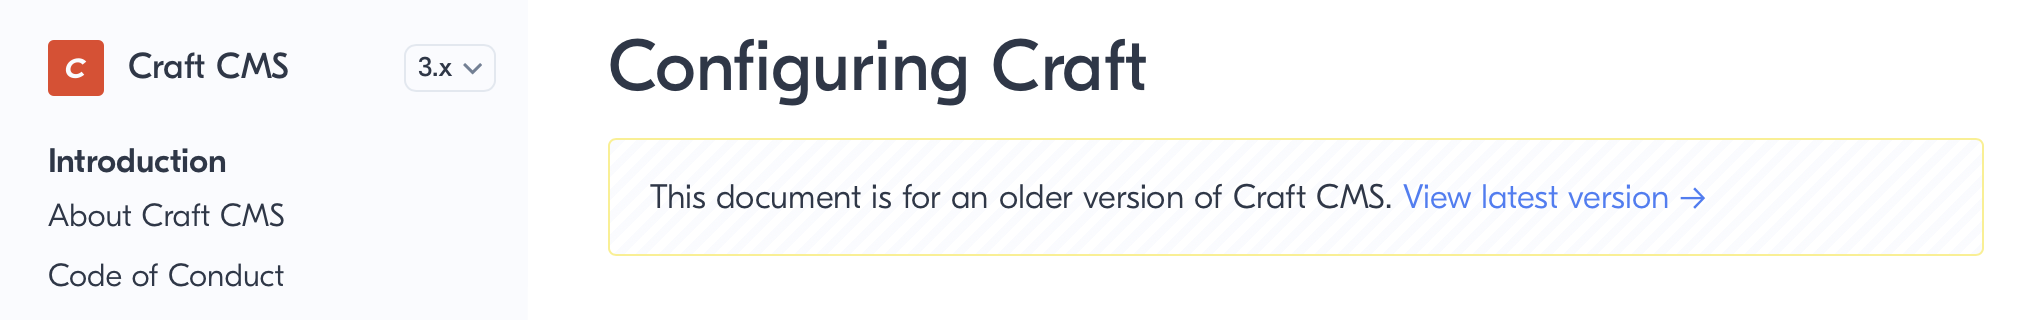 Tightly cropped screenshot of a small banner that reads “This document is for an older version of Craft CMS” with a link to view the latest version